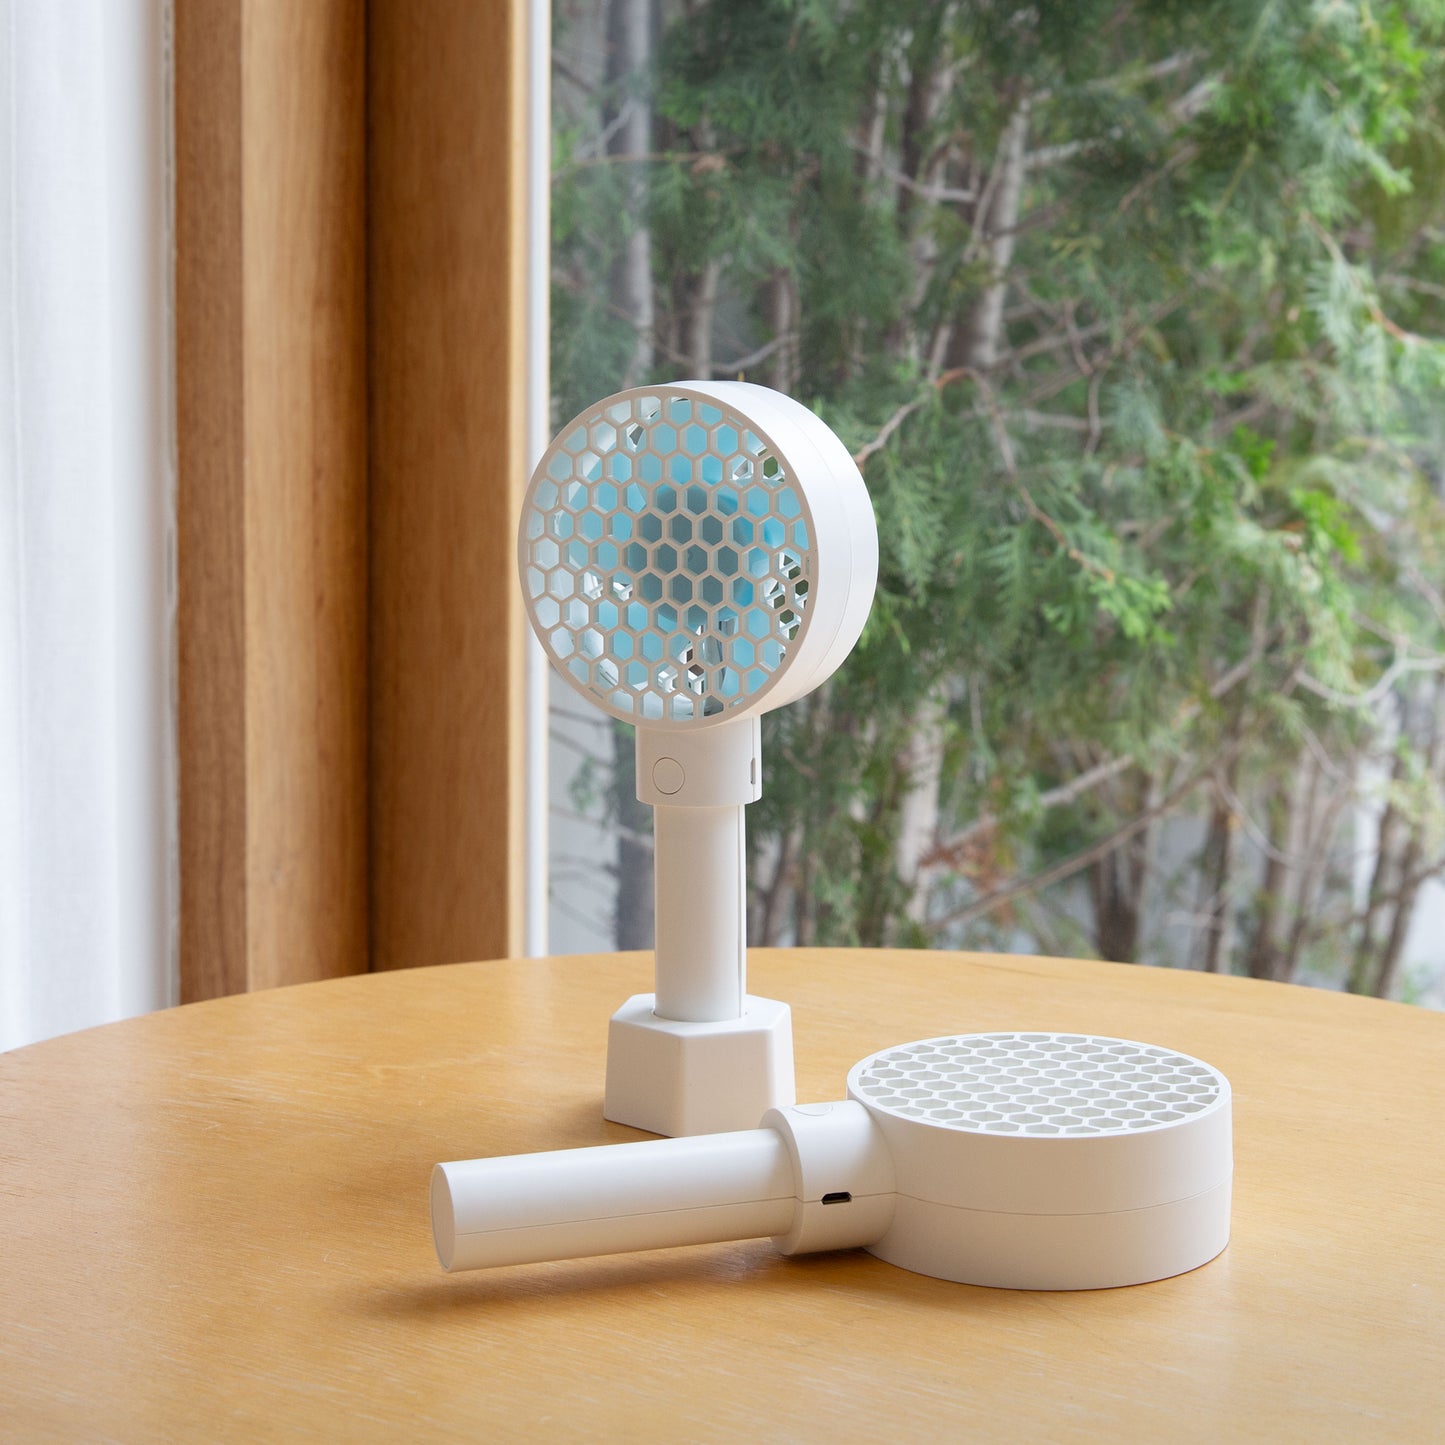 Honeycomb Faced Panel Handy Mini Fan with Cradle - Coolean